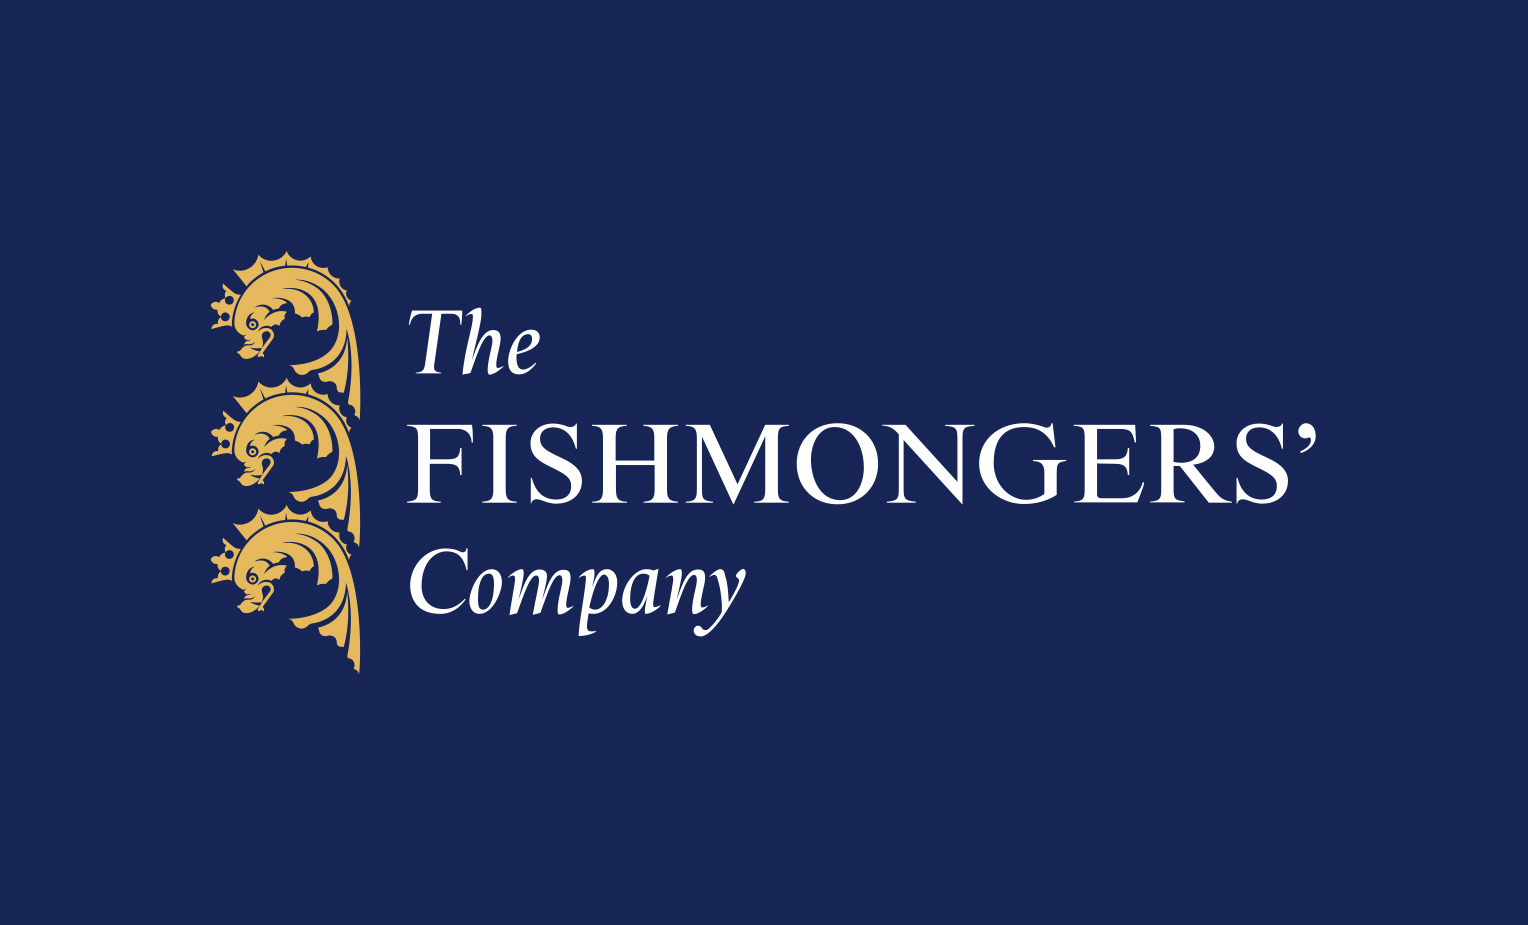 Grant Awarded to 90 North Foundation by The Fishmongers’ Company